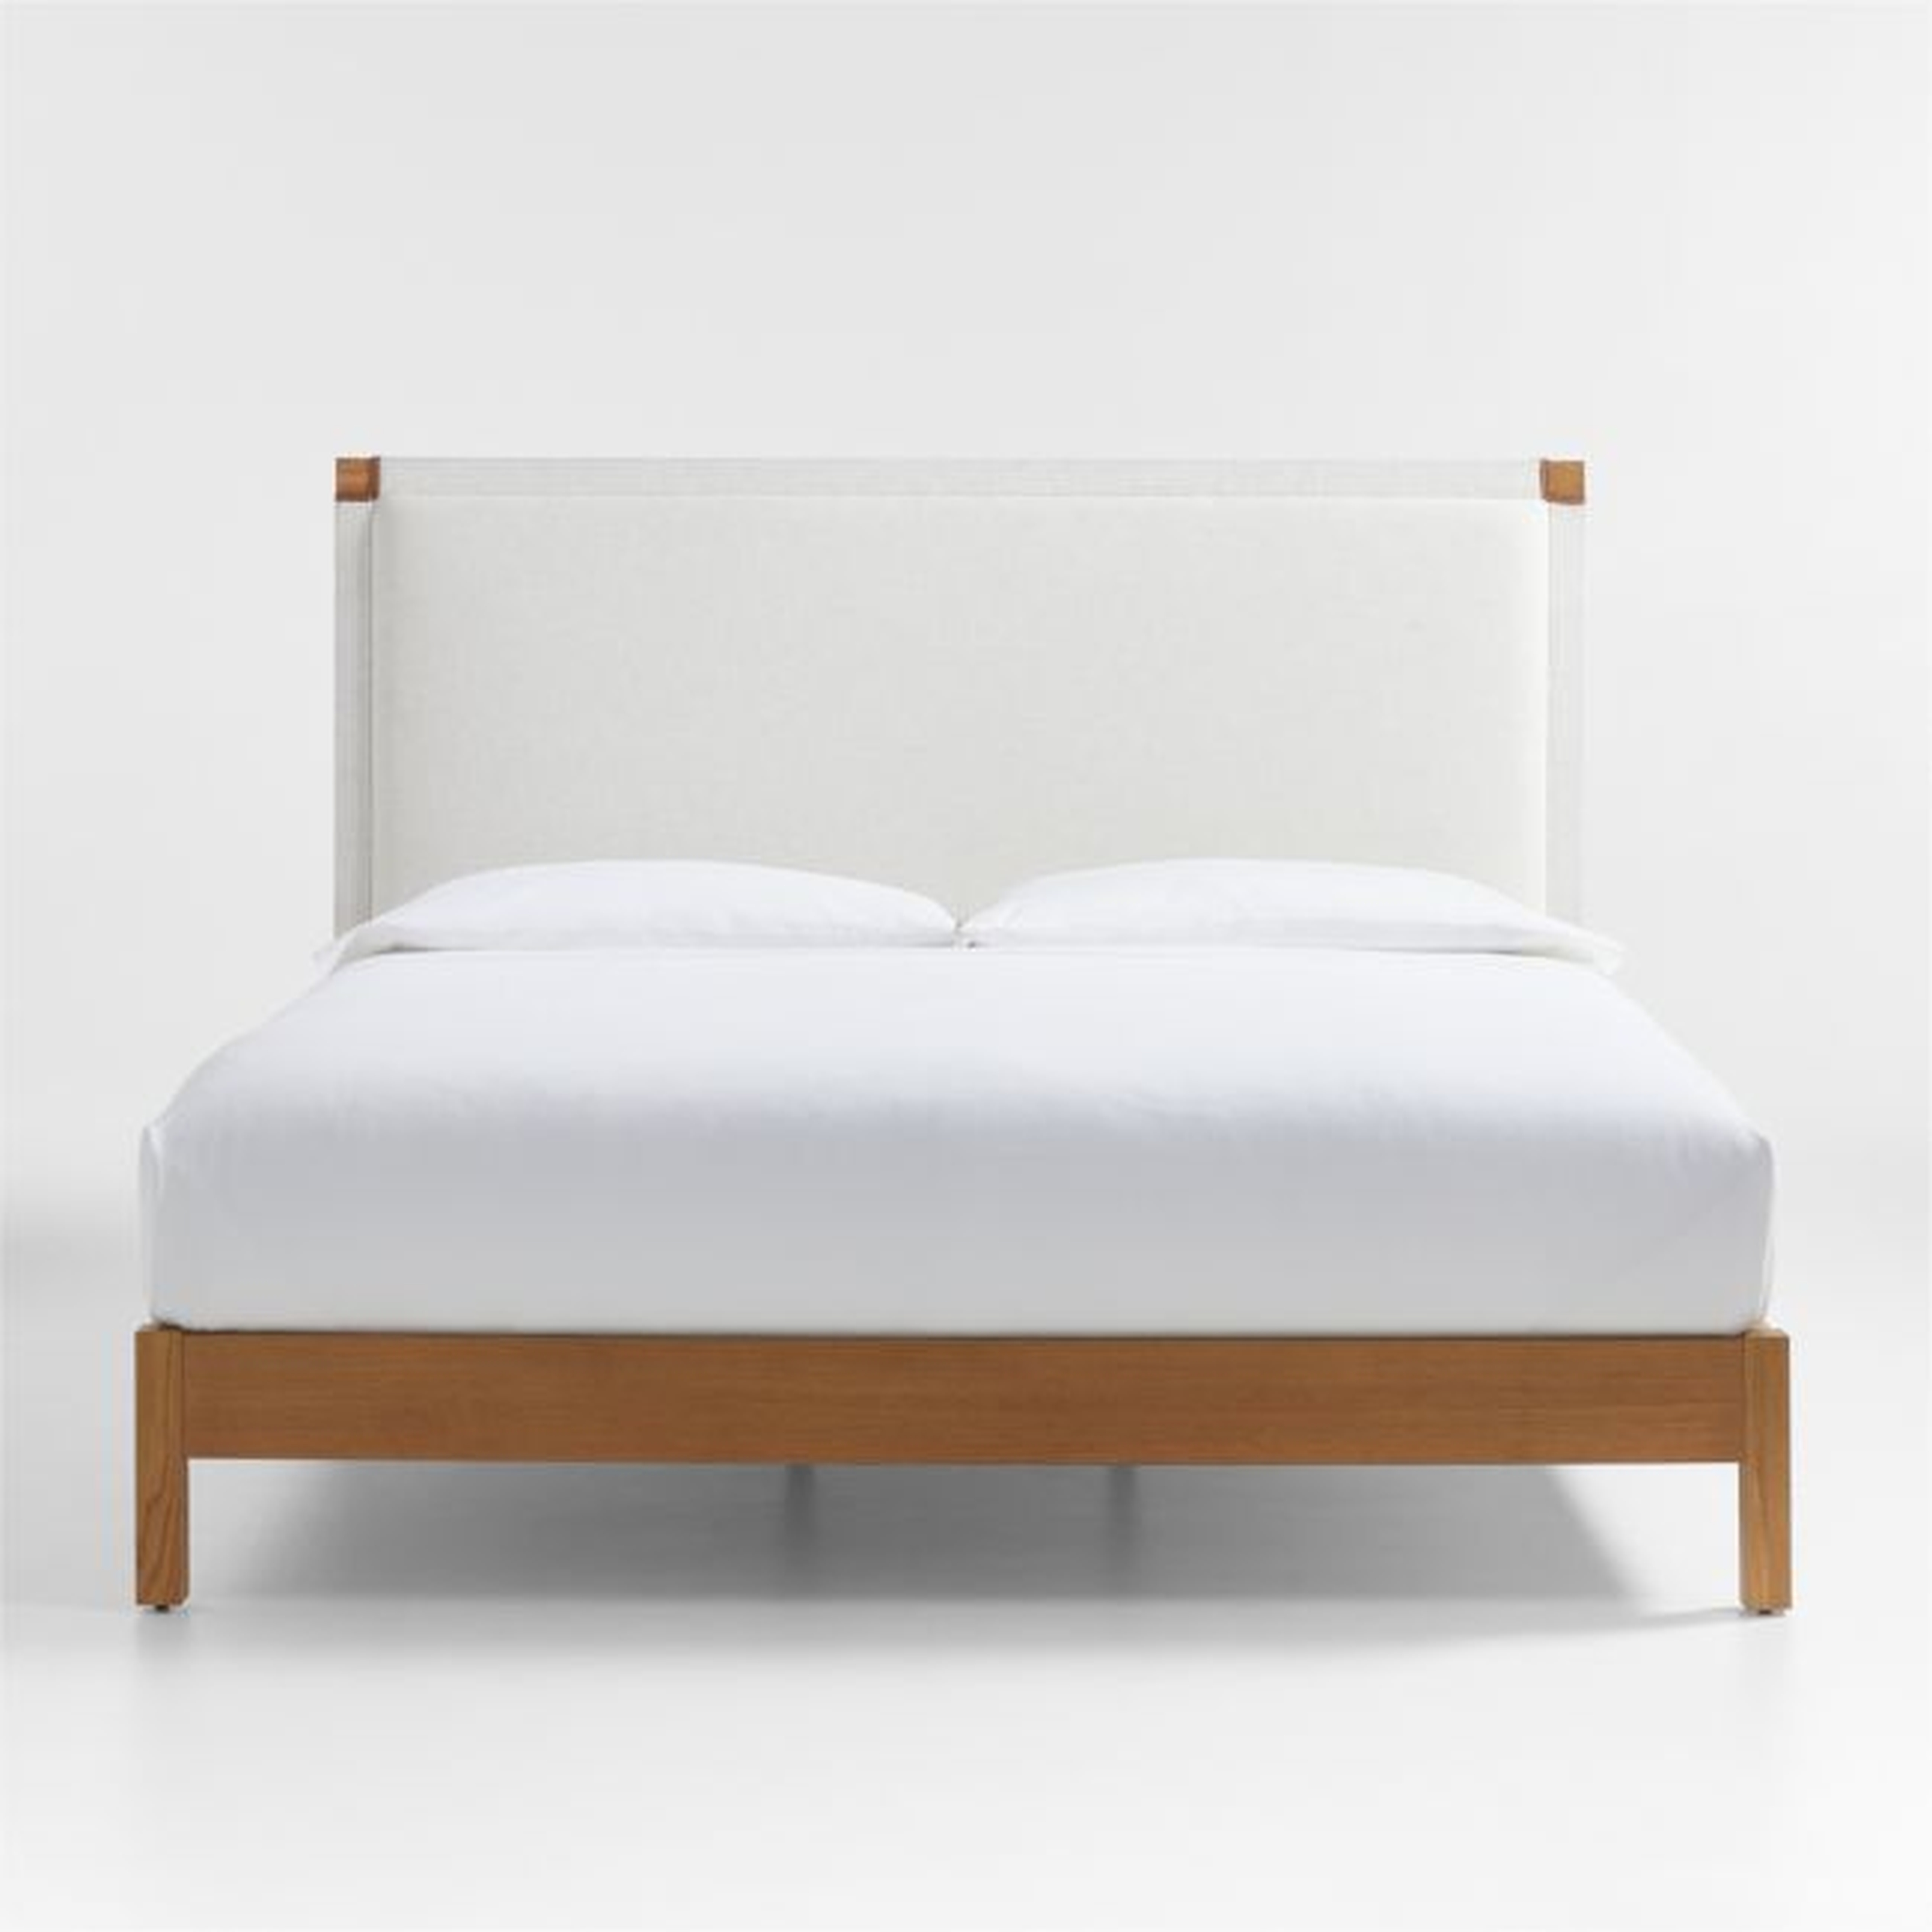 Shinola Hotel Upholstered Wood King Bed - Crate and Barrel